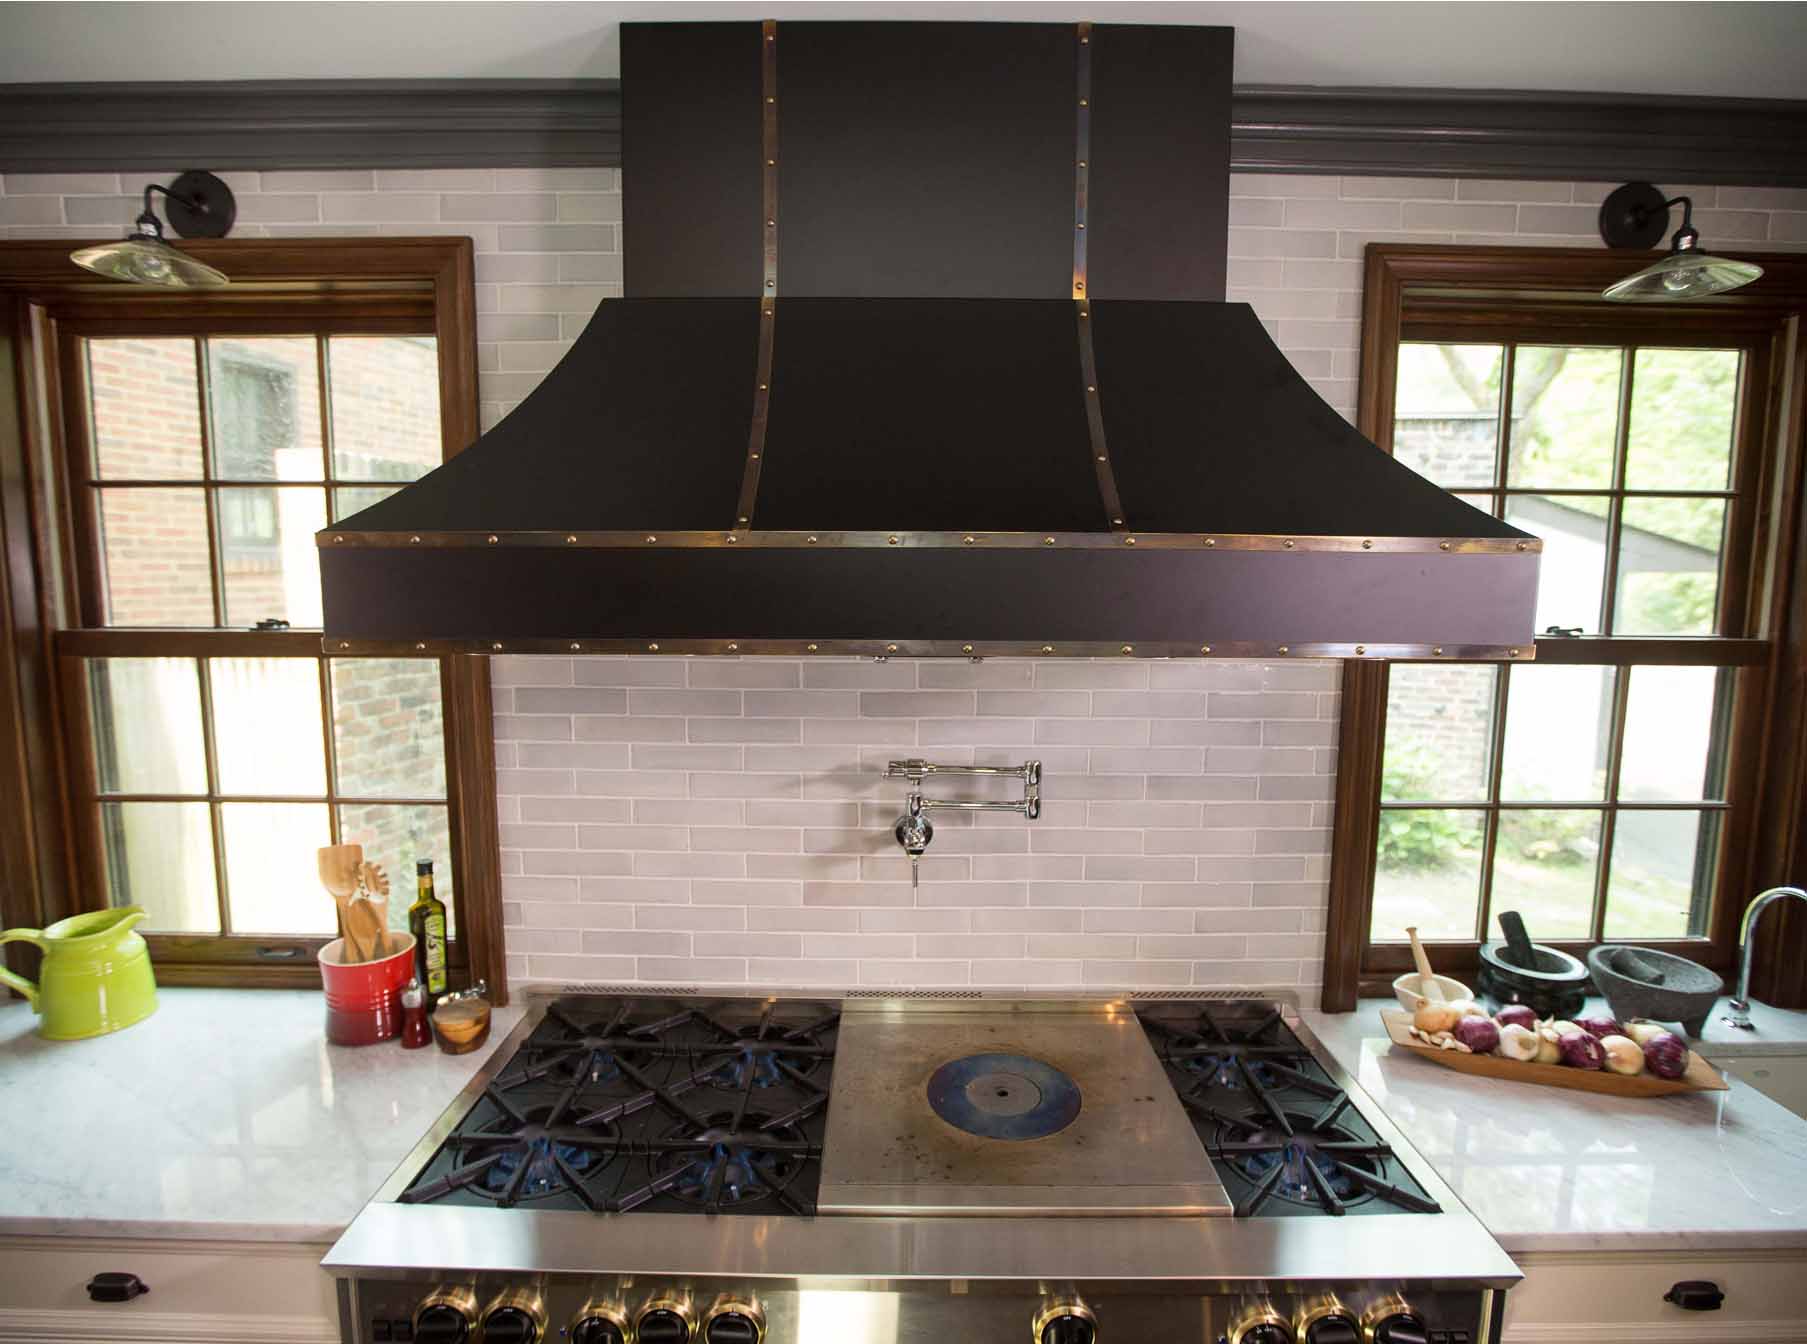 a range hood should be larger than the cooktop for efficiency